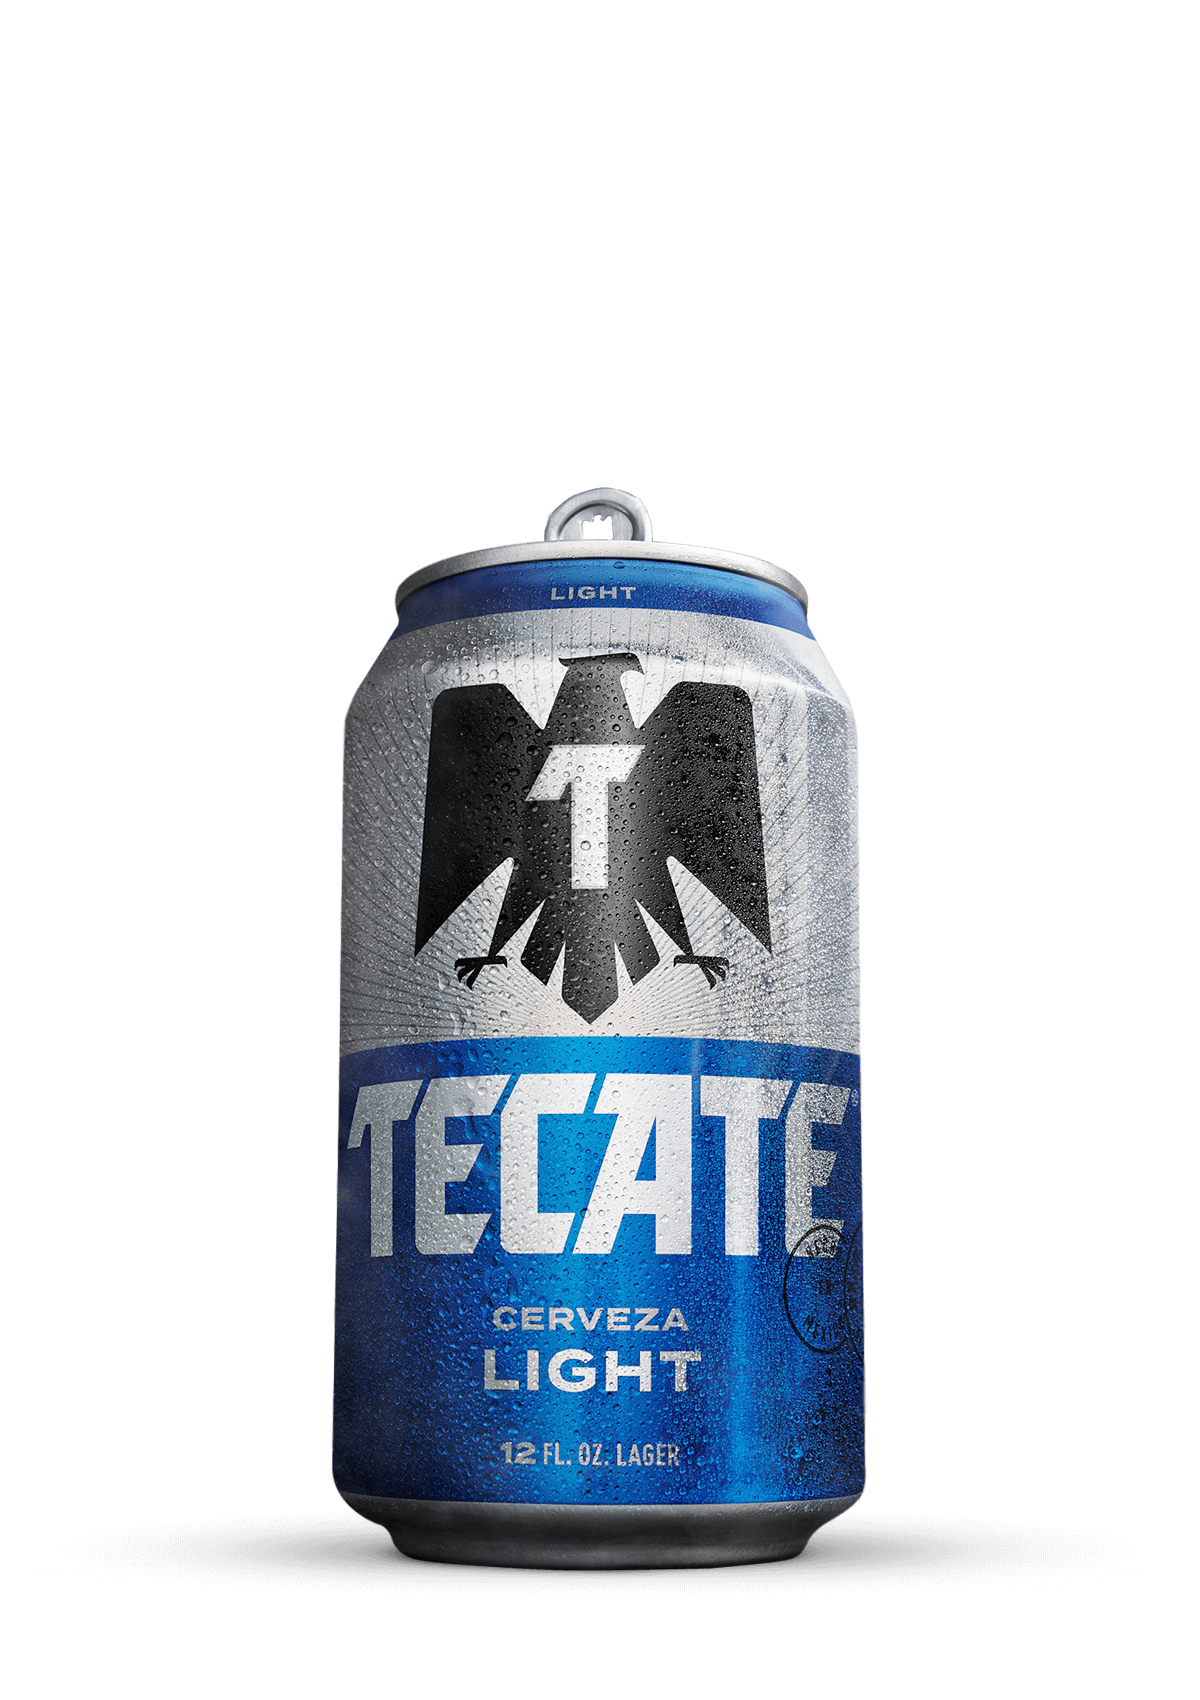 Tecate® Light 3.9% alc. vol. 12 oz blue and silver can.